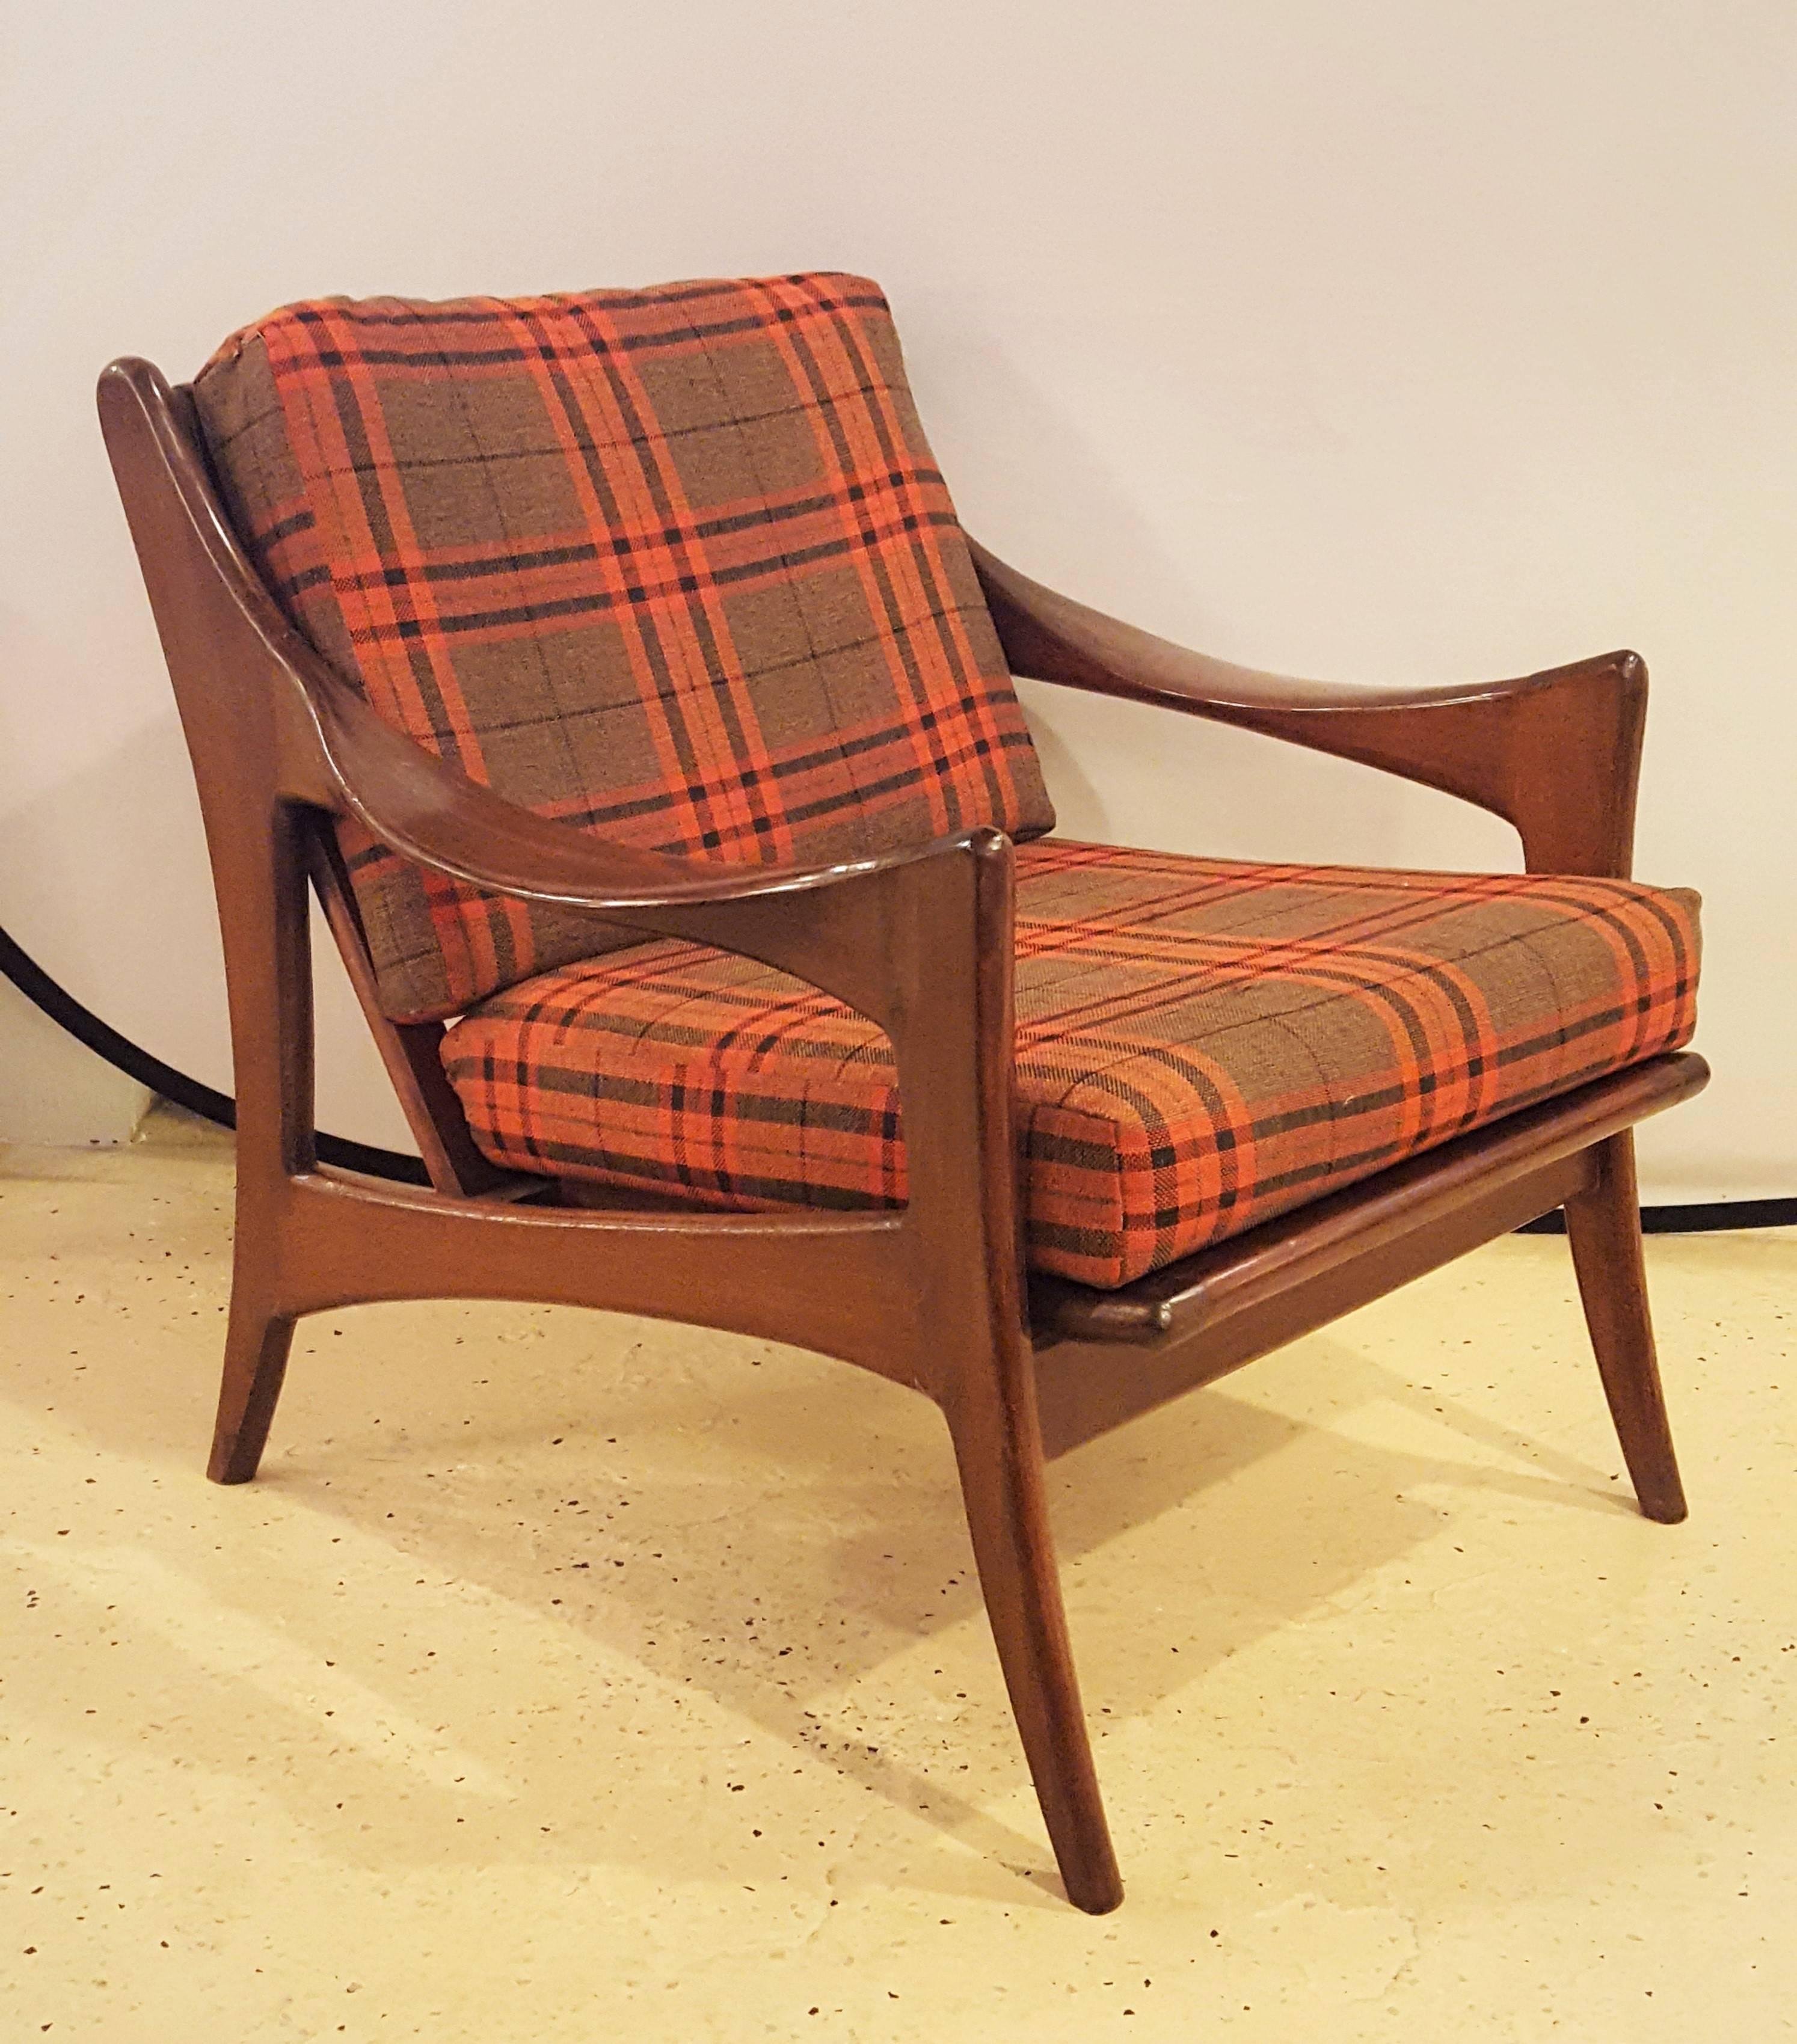 North American Pair of Mid-Century Modern Lounge Chairs